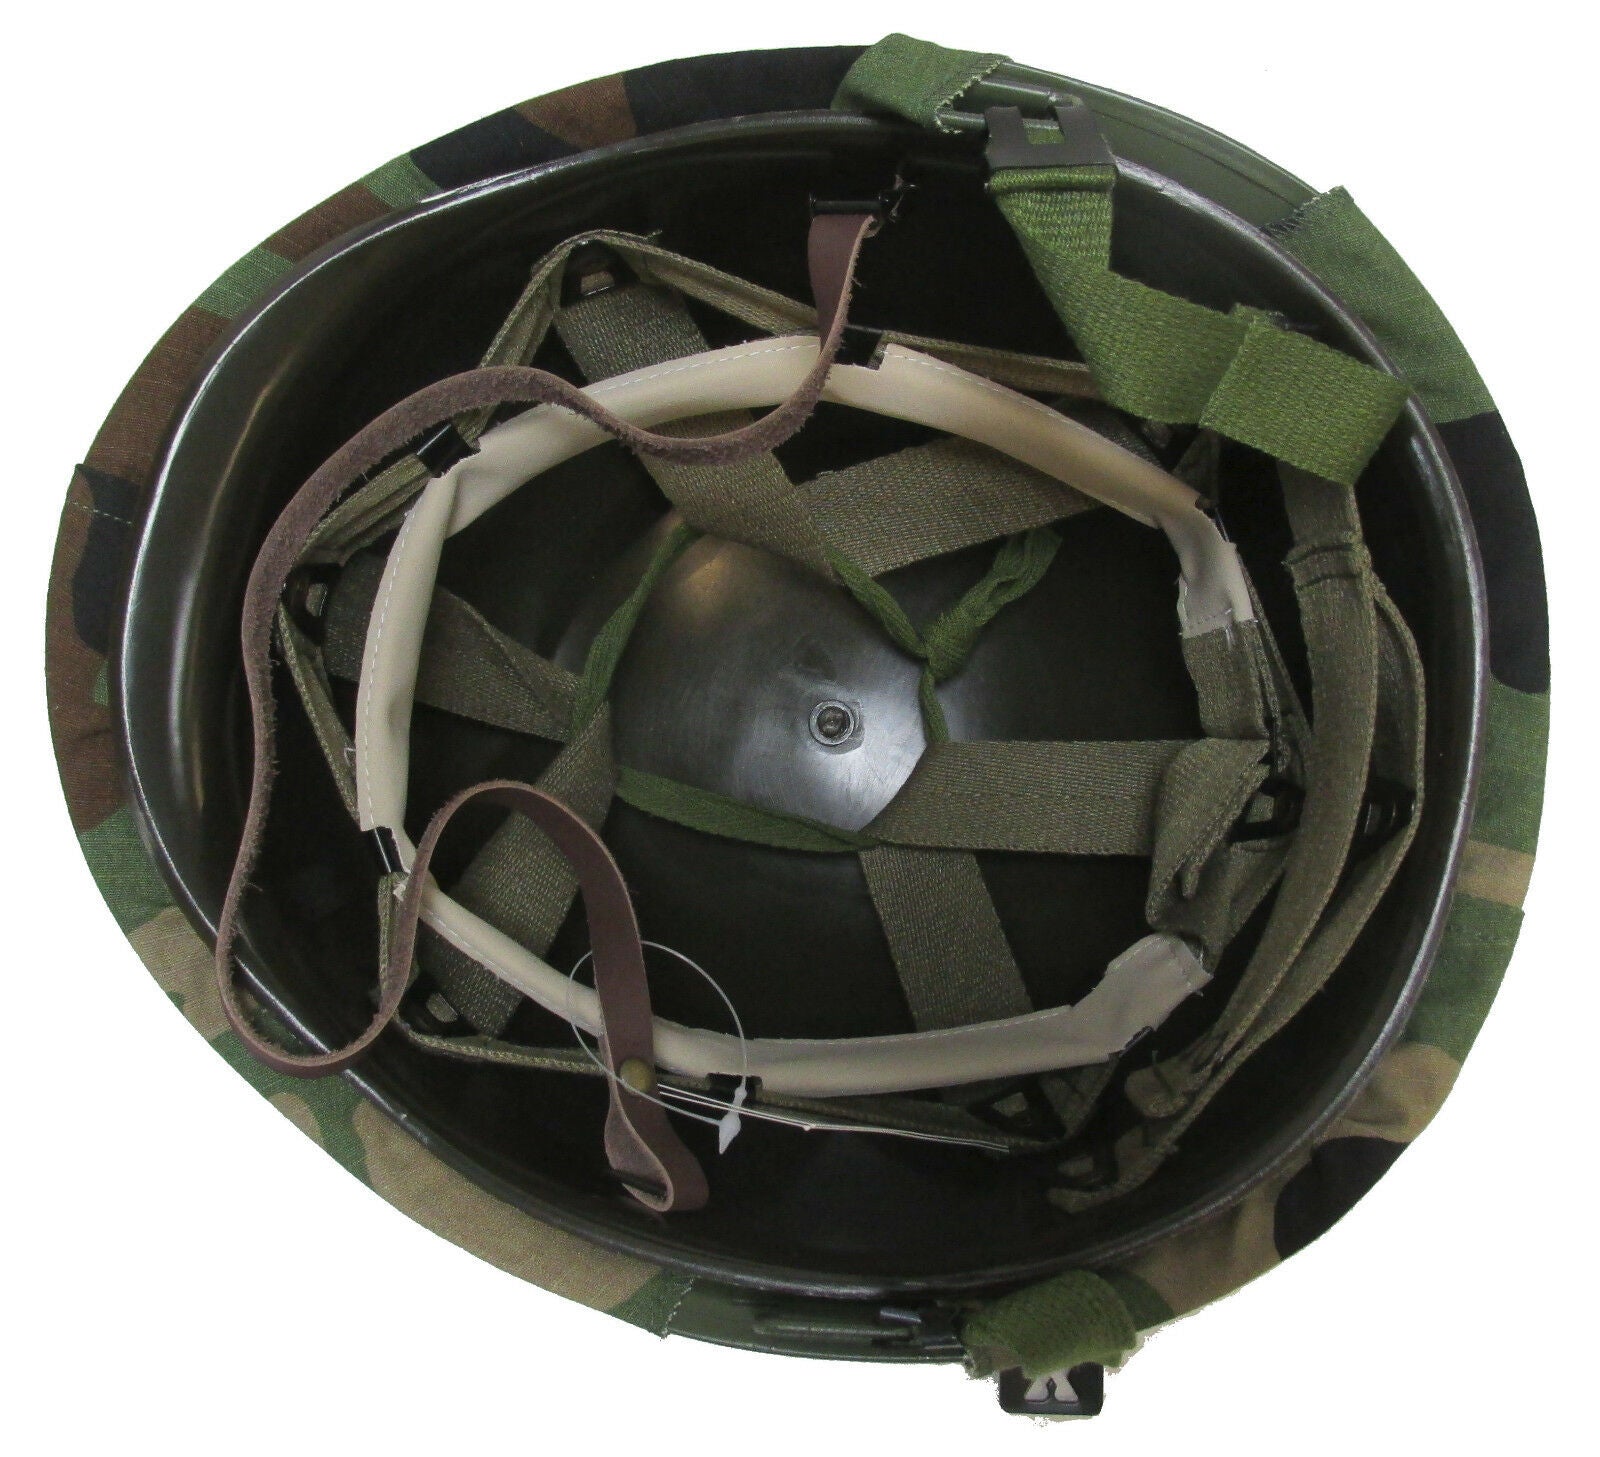 Reproduction U.S. M1 Helmet with Woodland Camo Cover and Band